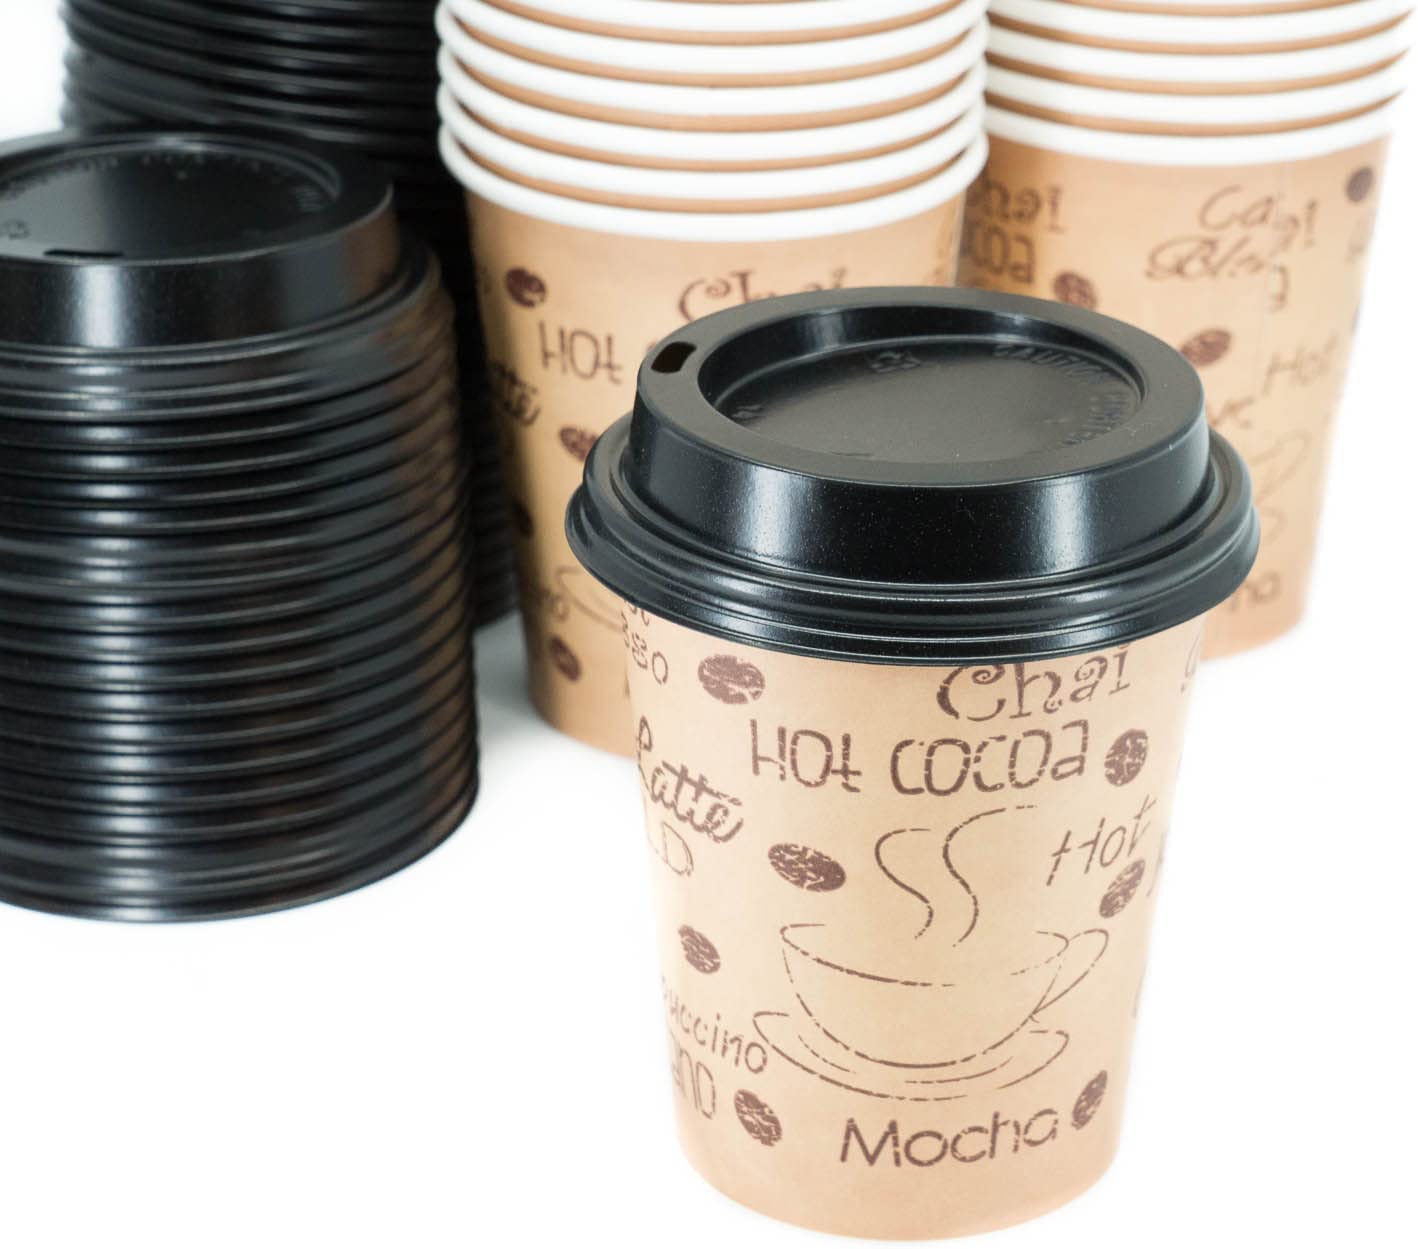 [100 Pack] 10 oz Disposable Paper Coffee Cups with Black Lids, to Go Coffee Cups with Lids for Hot and Cold Beverage, on The Go Cups for Coffee, Hot